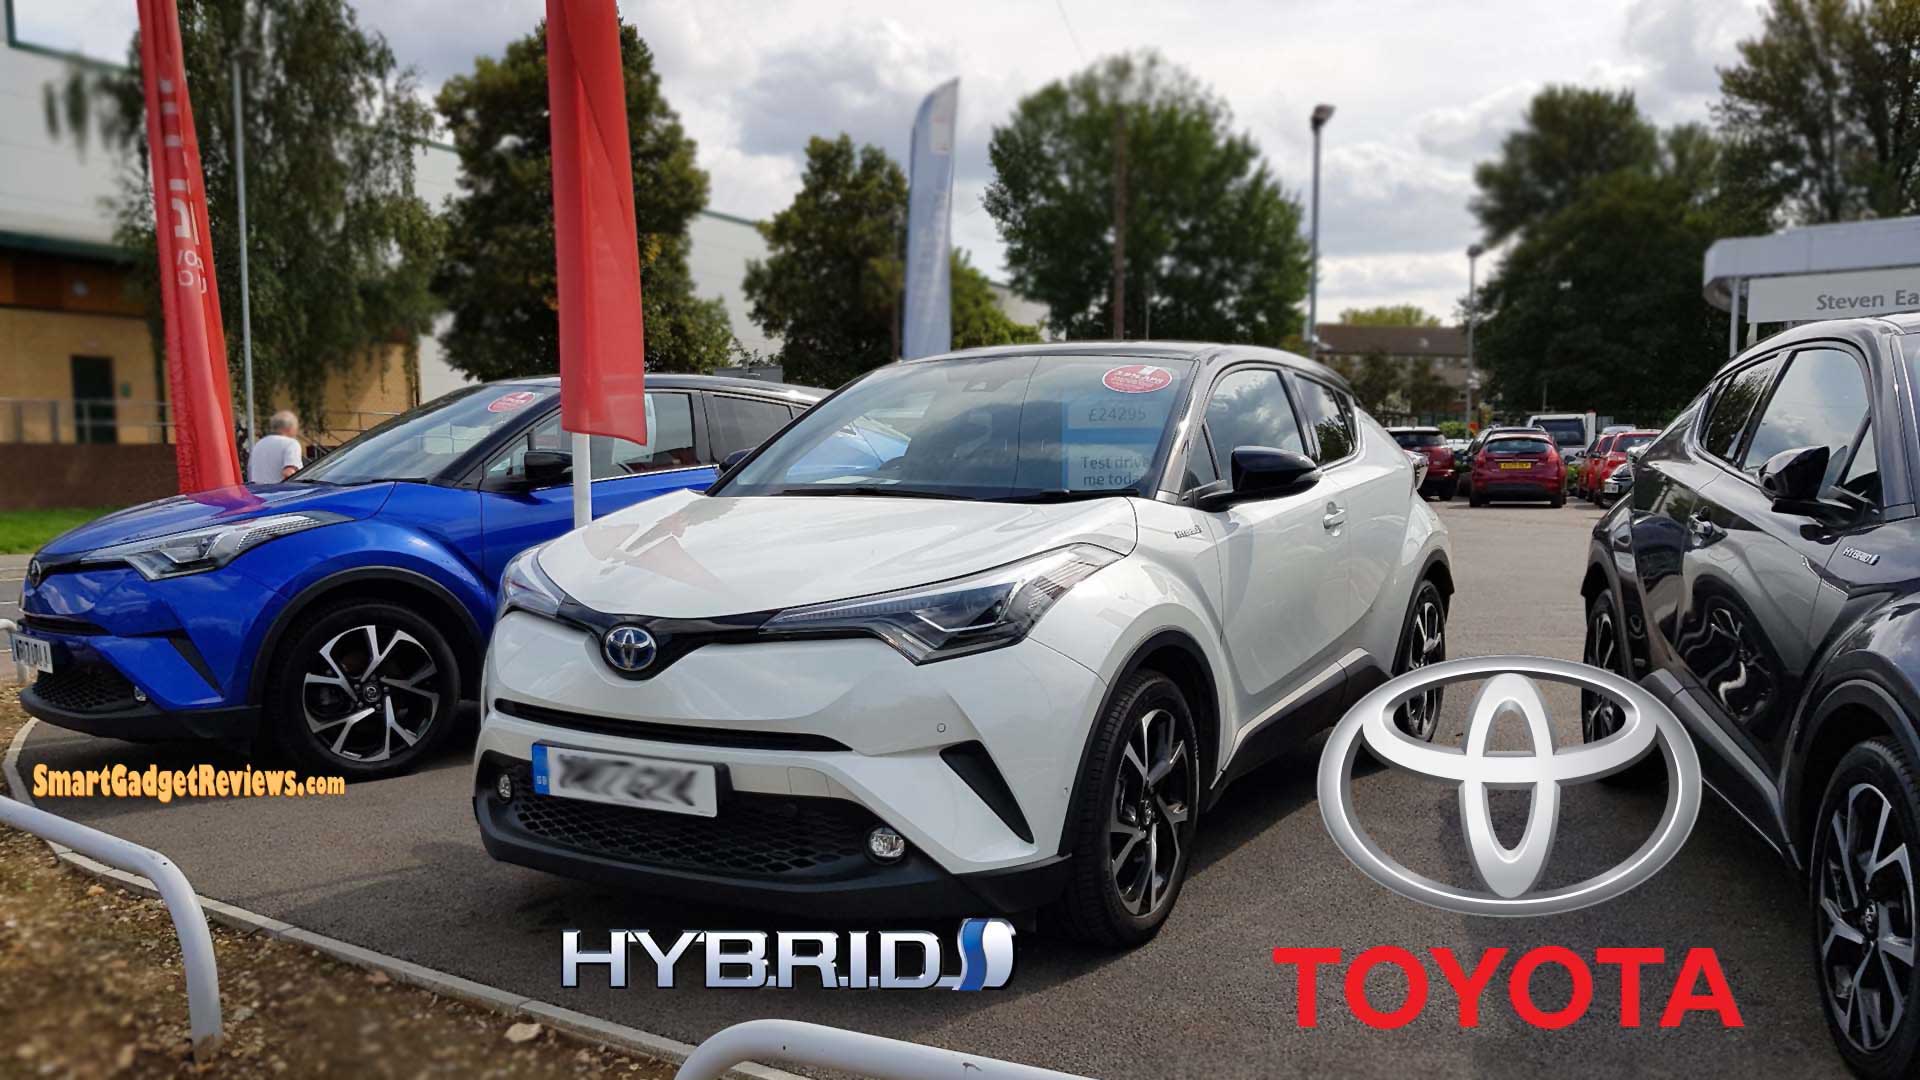 The All New 2018 Toyota C-HR Crossover SUV Car Steven Eagell Toyota (Watford)